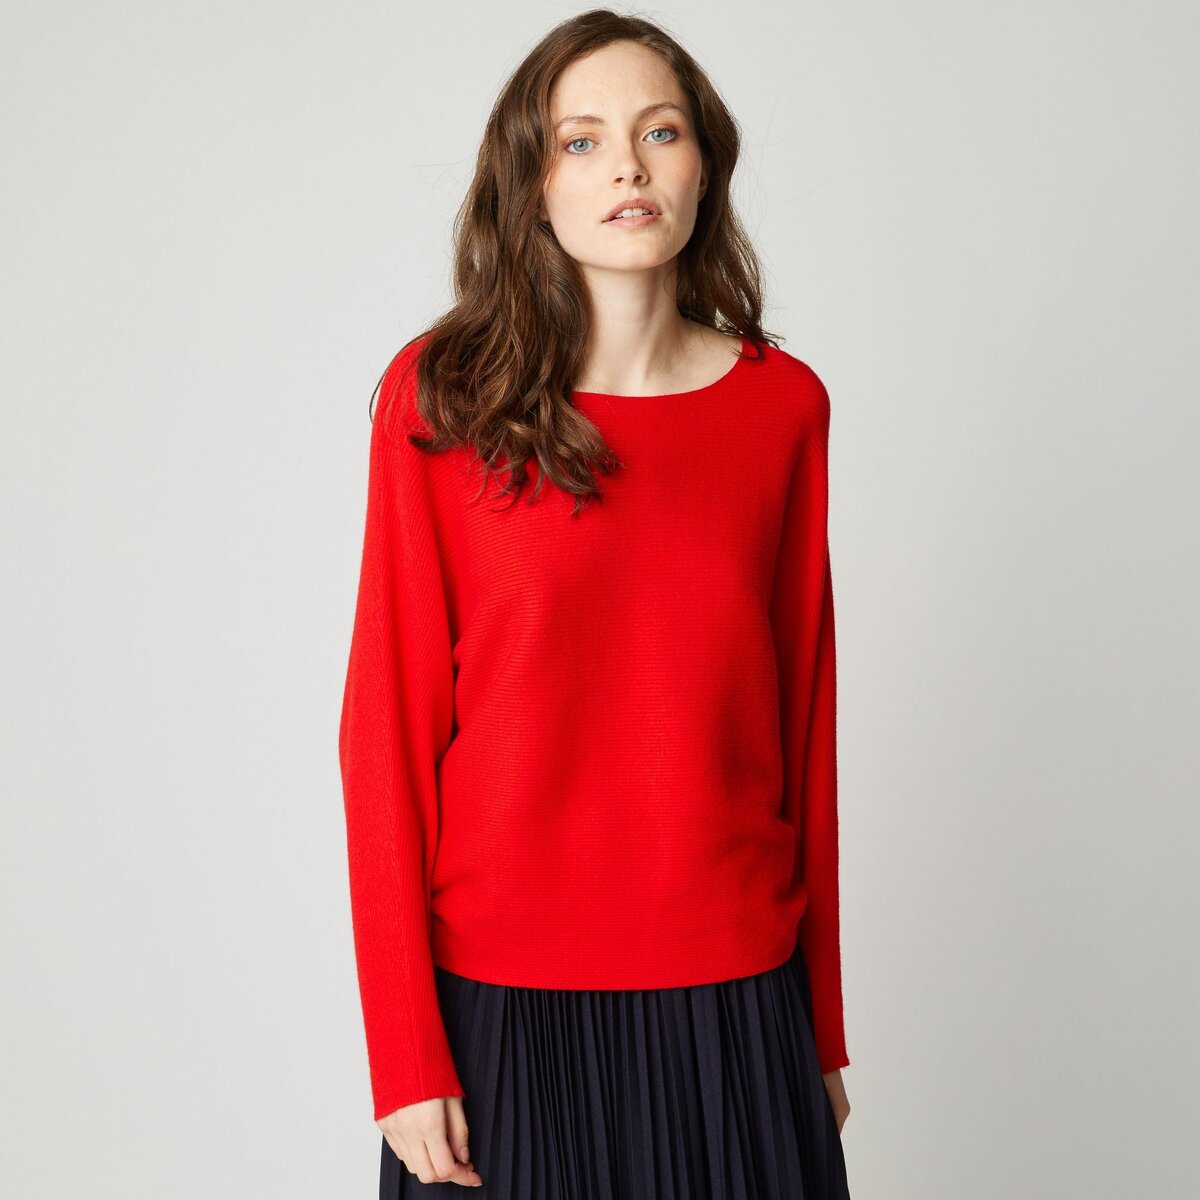 INEXTENSO Pull col bateau rouge femme